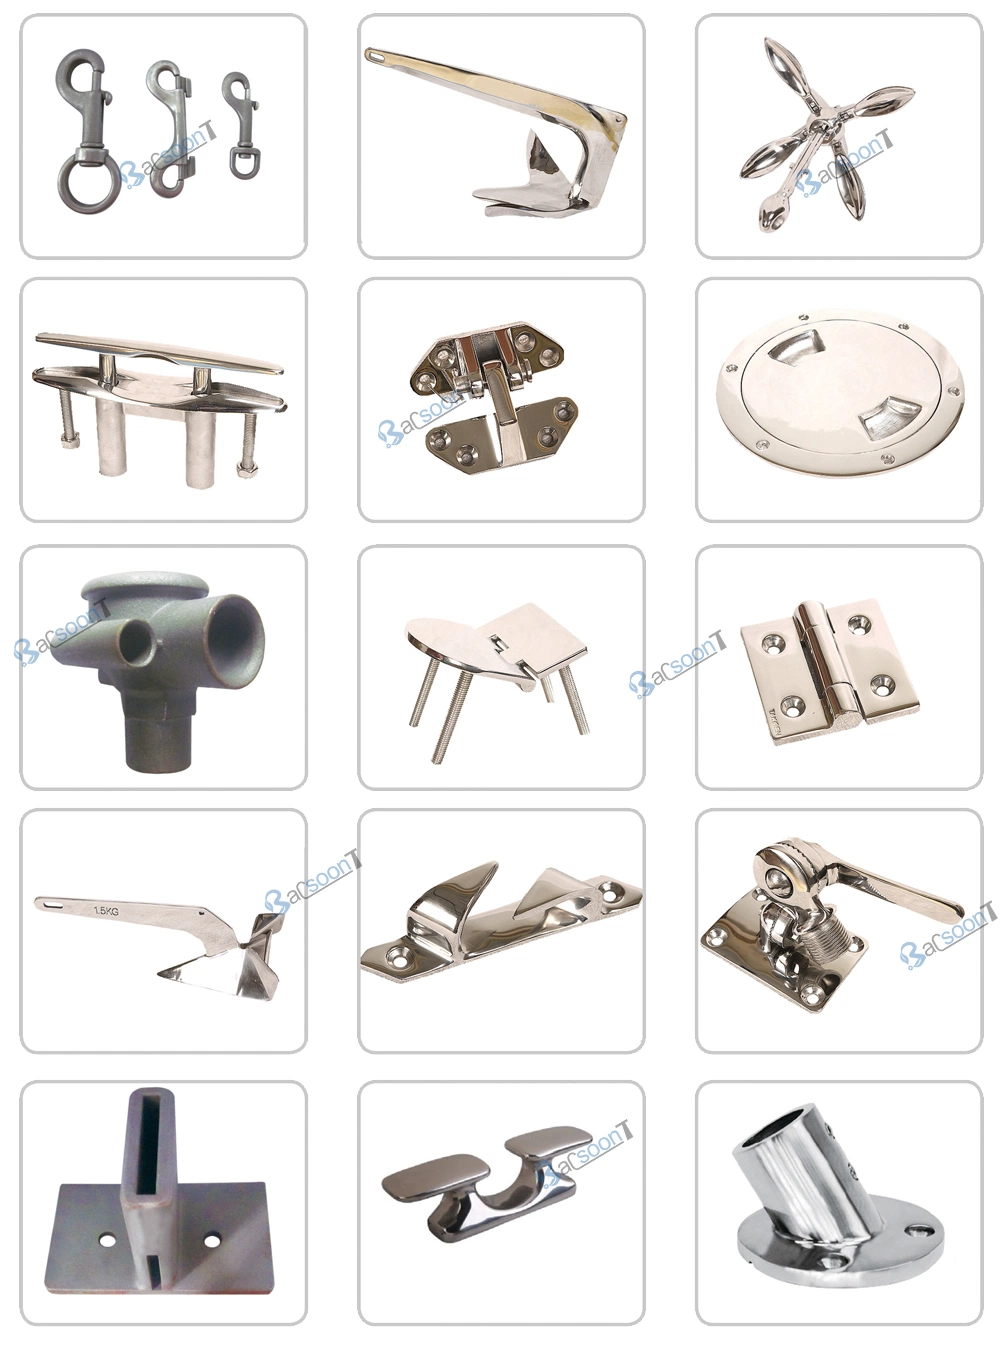 Stainless Steel/Carbon Steel Lost Wax Casting/Precision Casting Pipe Fitting/Y Piece with Sandblasting/Machining/Mirror Polishing in China